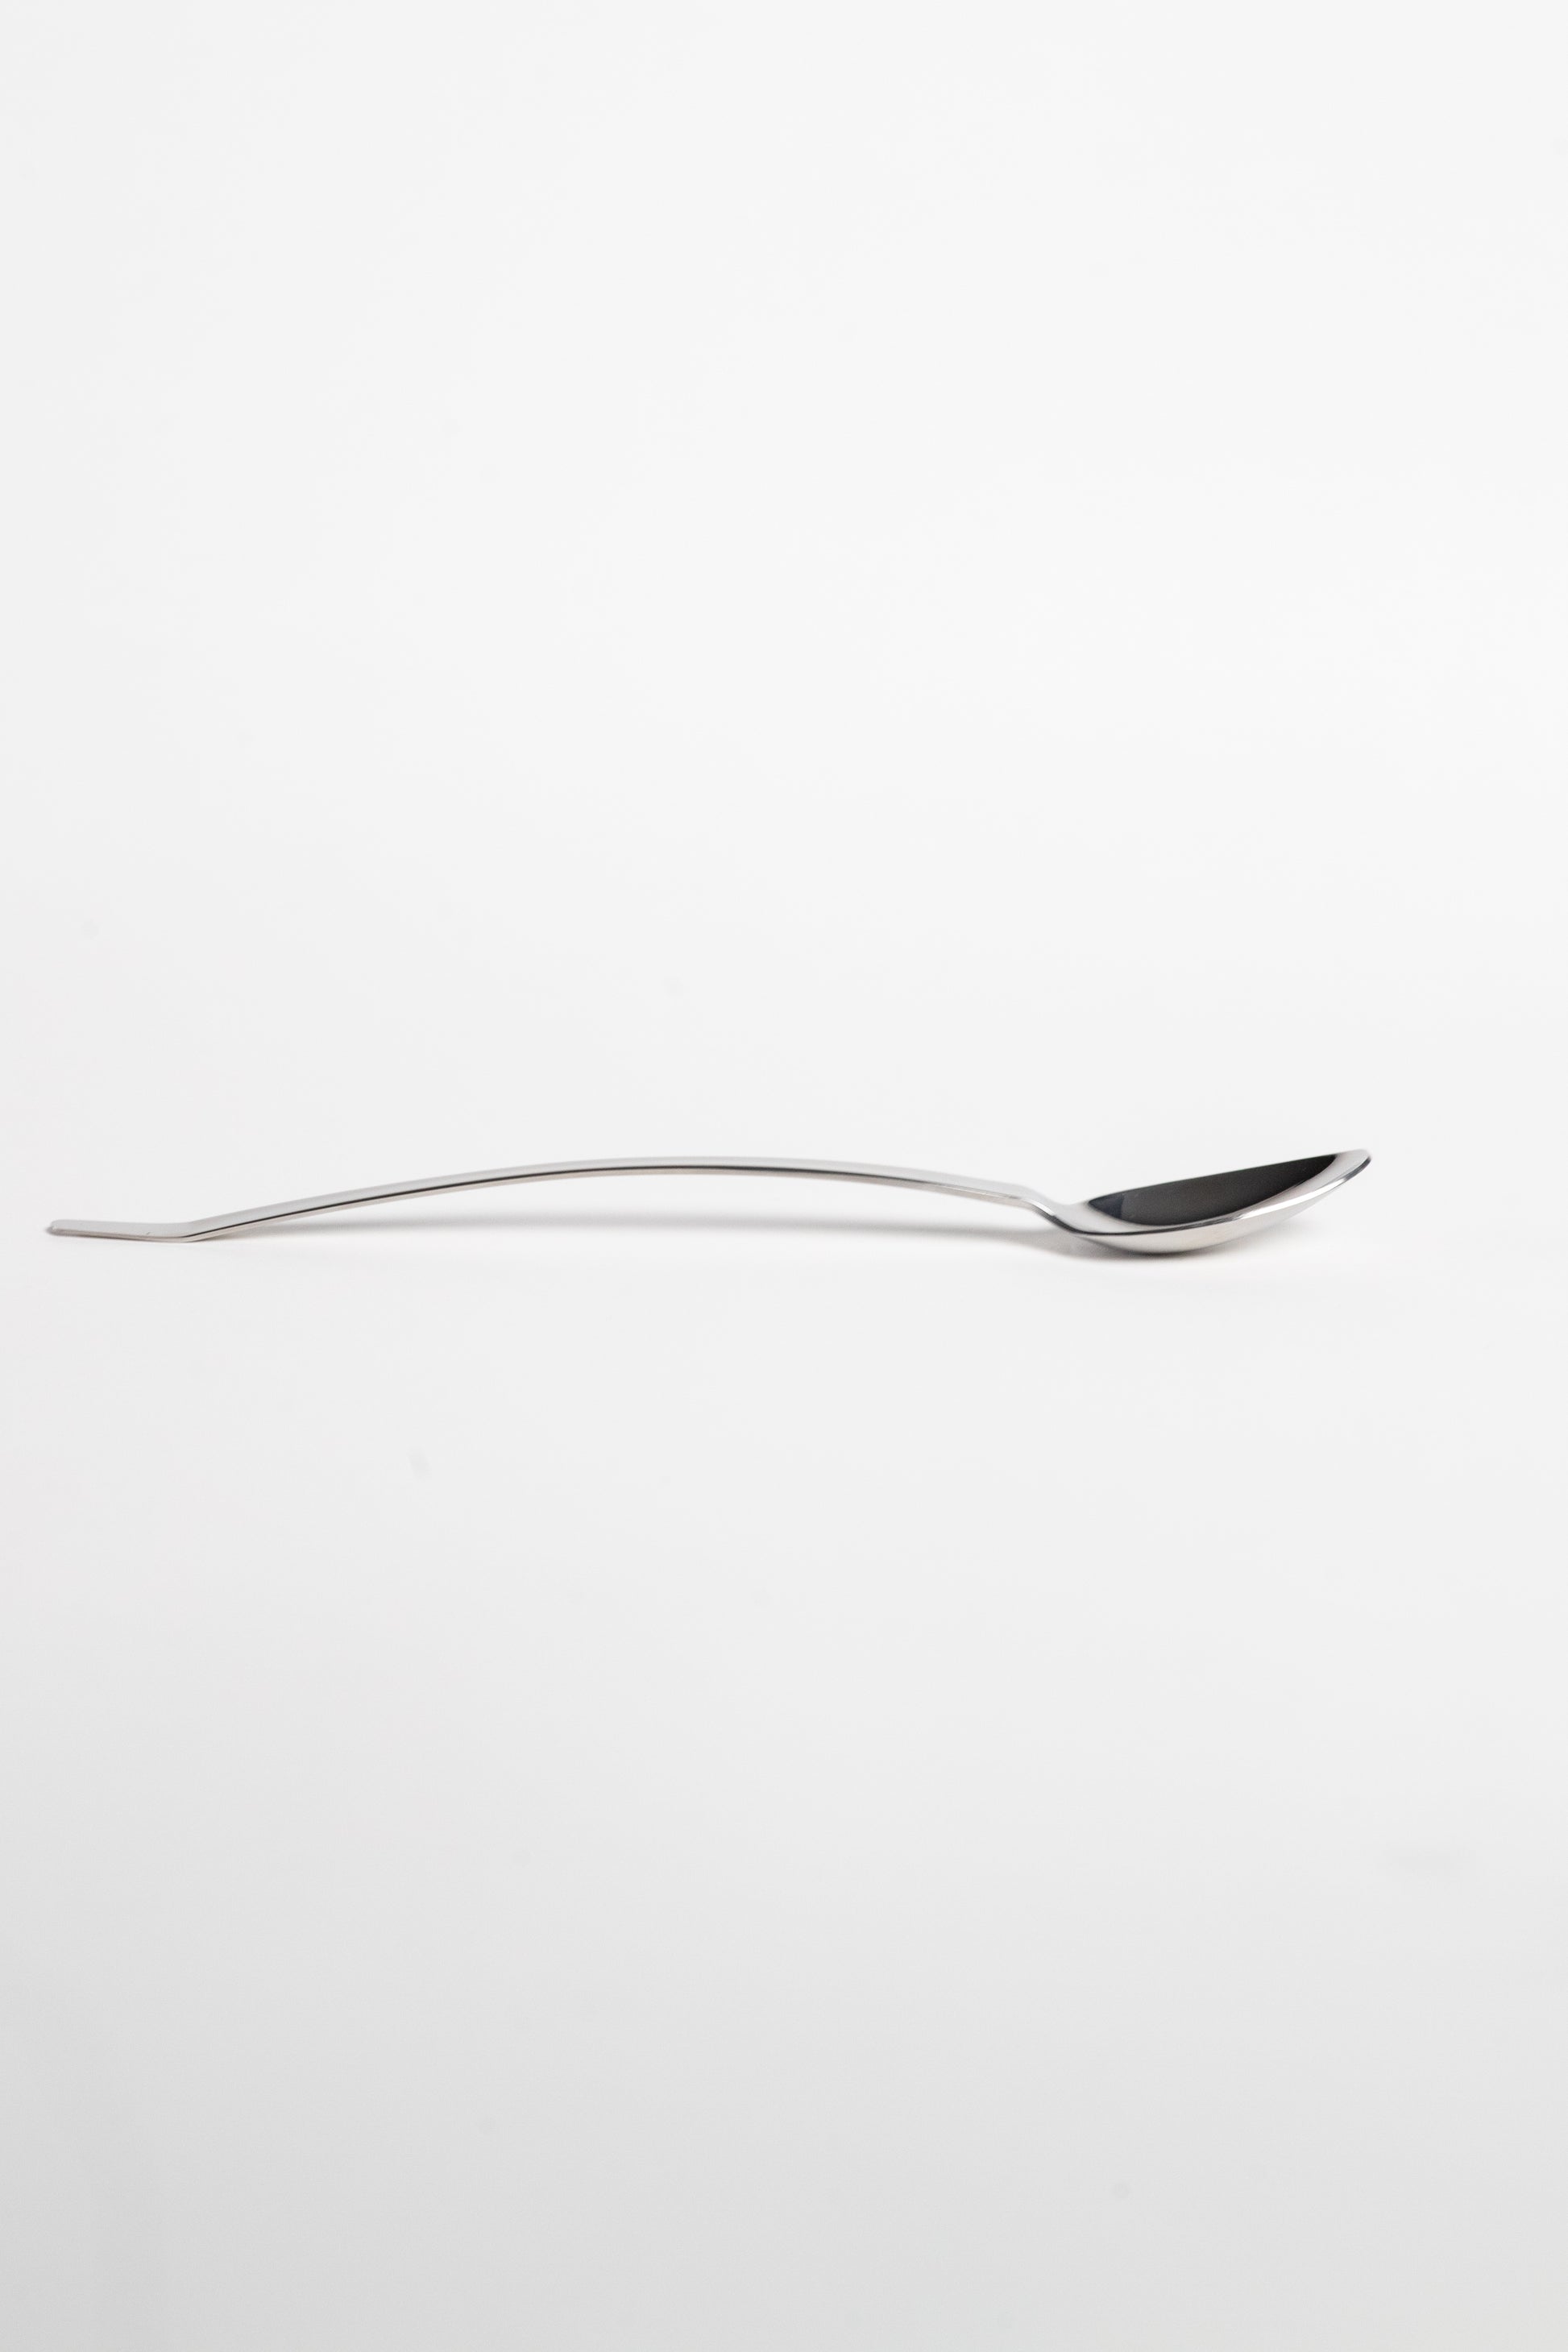 Stainless Quenelle Spoon by Chef Jenner Tomaska